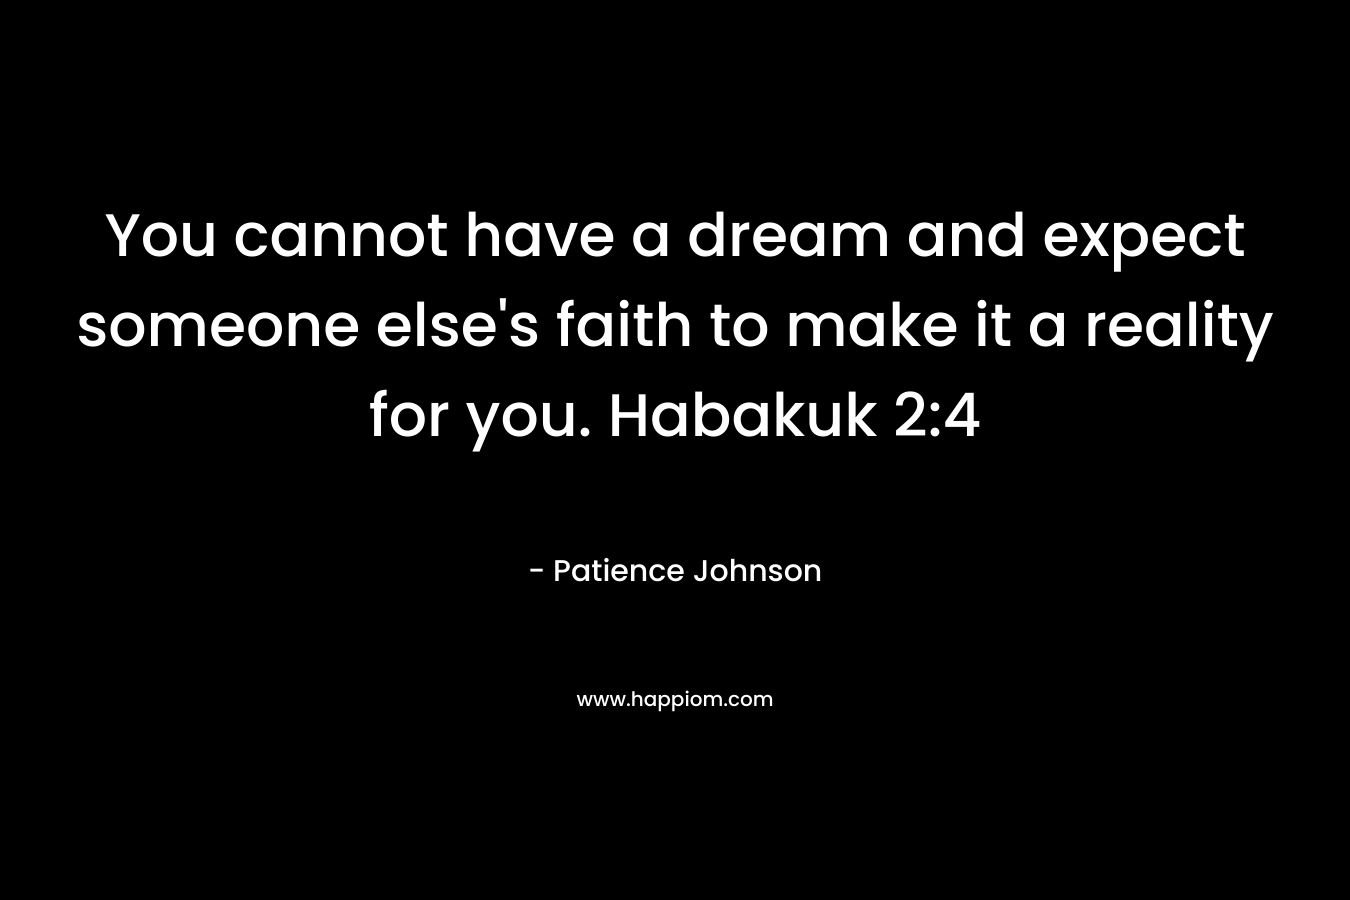 You cannot have a dream and expect someone else's faith to make it a reality for you. Habakuk 2:4